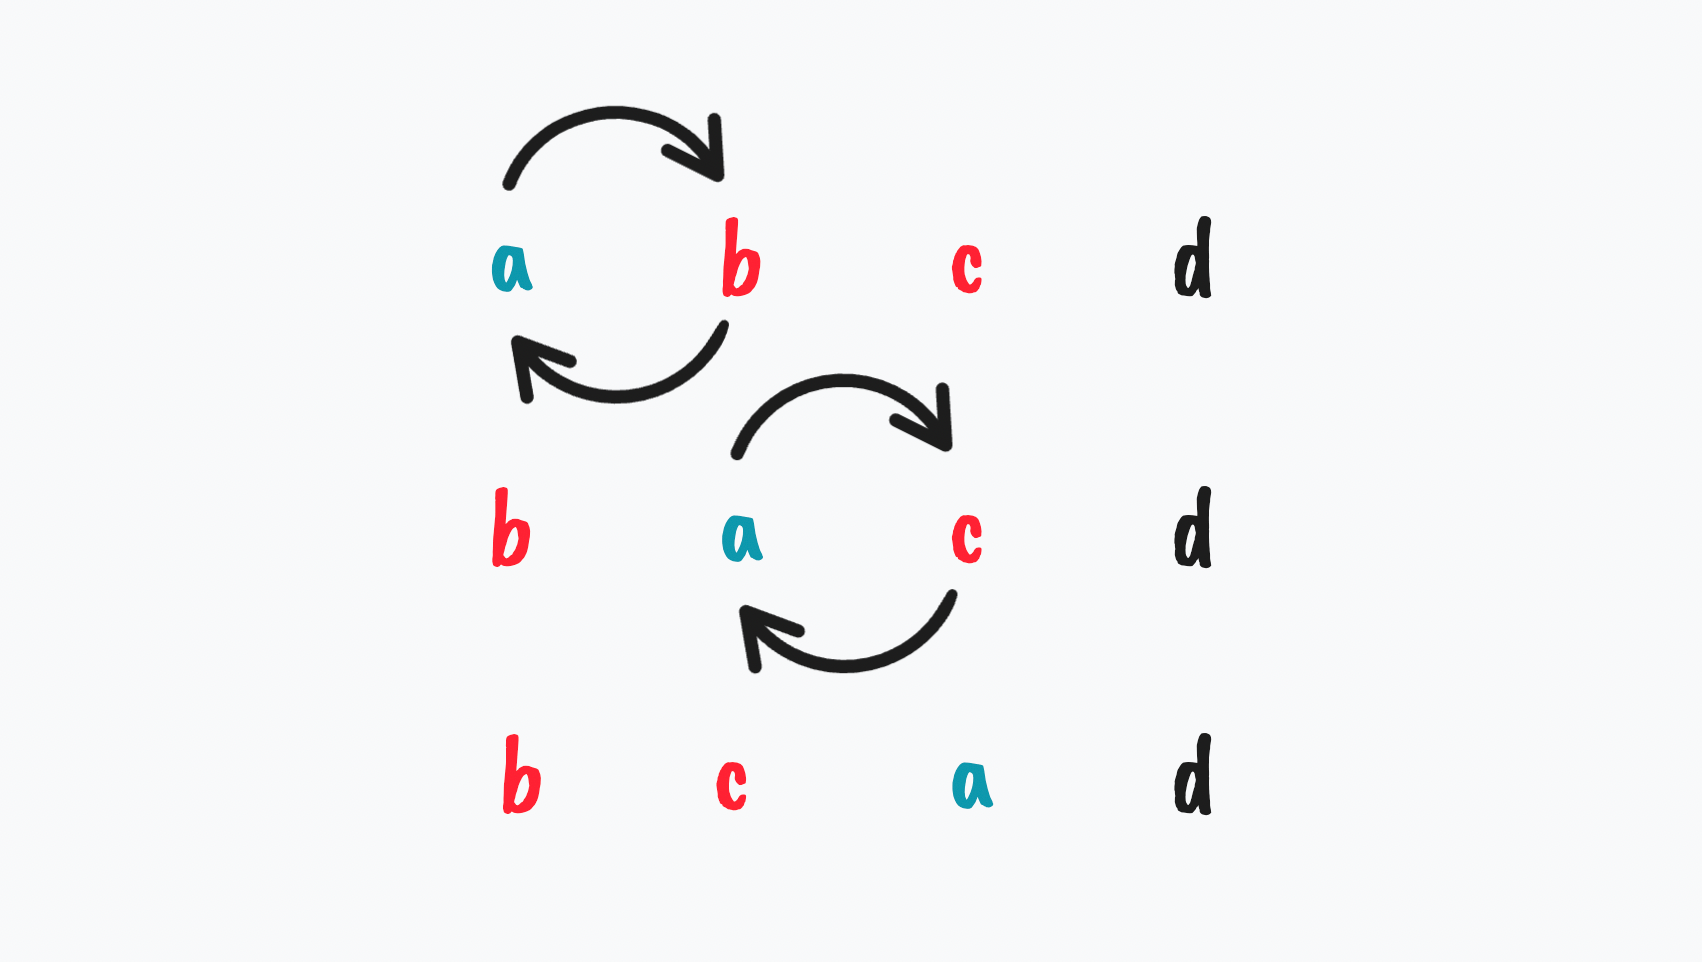 A diagram showing the result of moving b and c backward in items a, b, c, d.